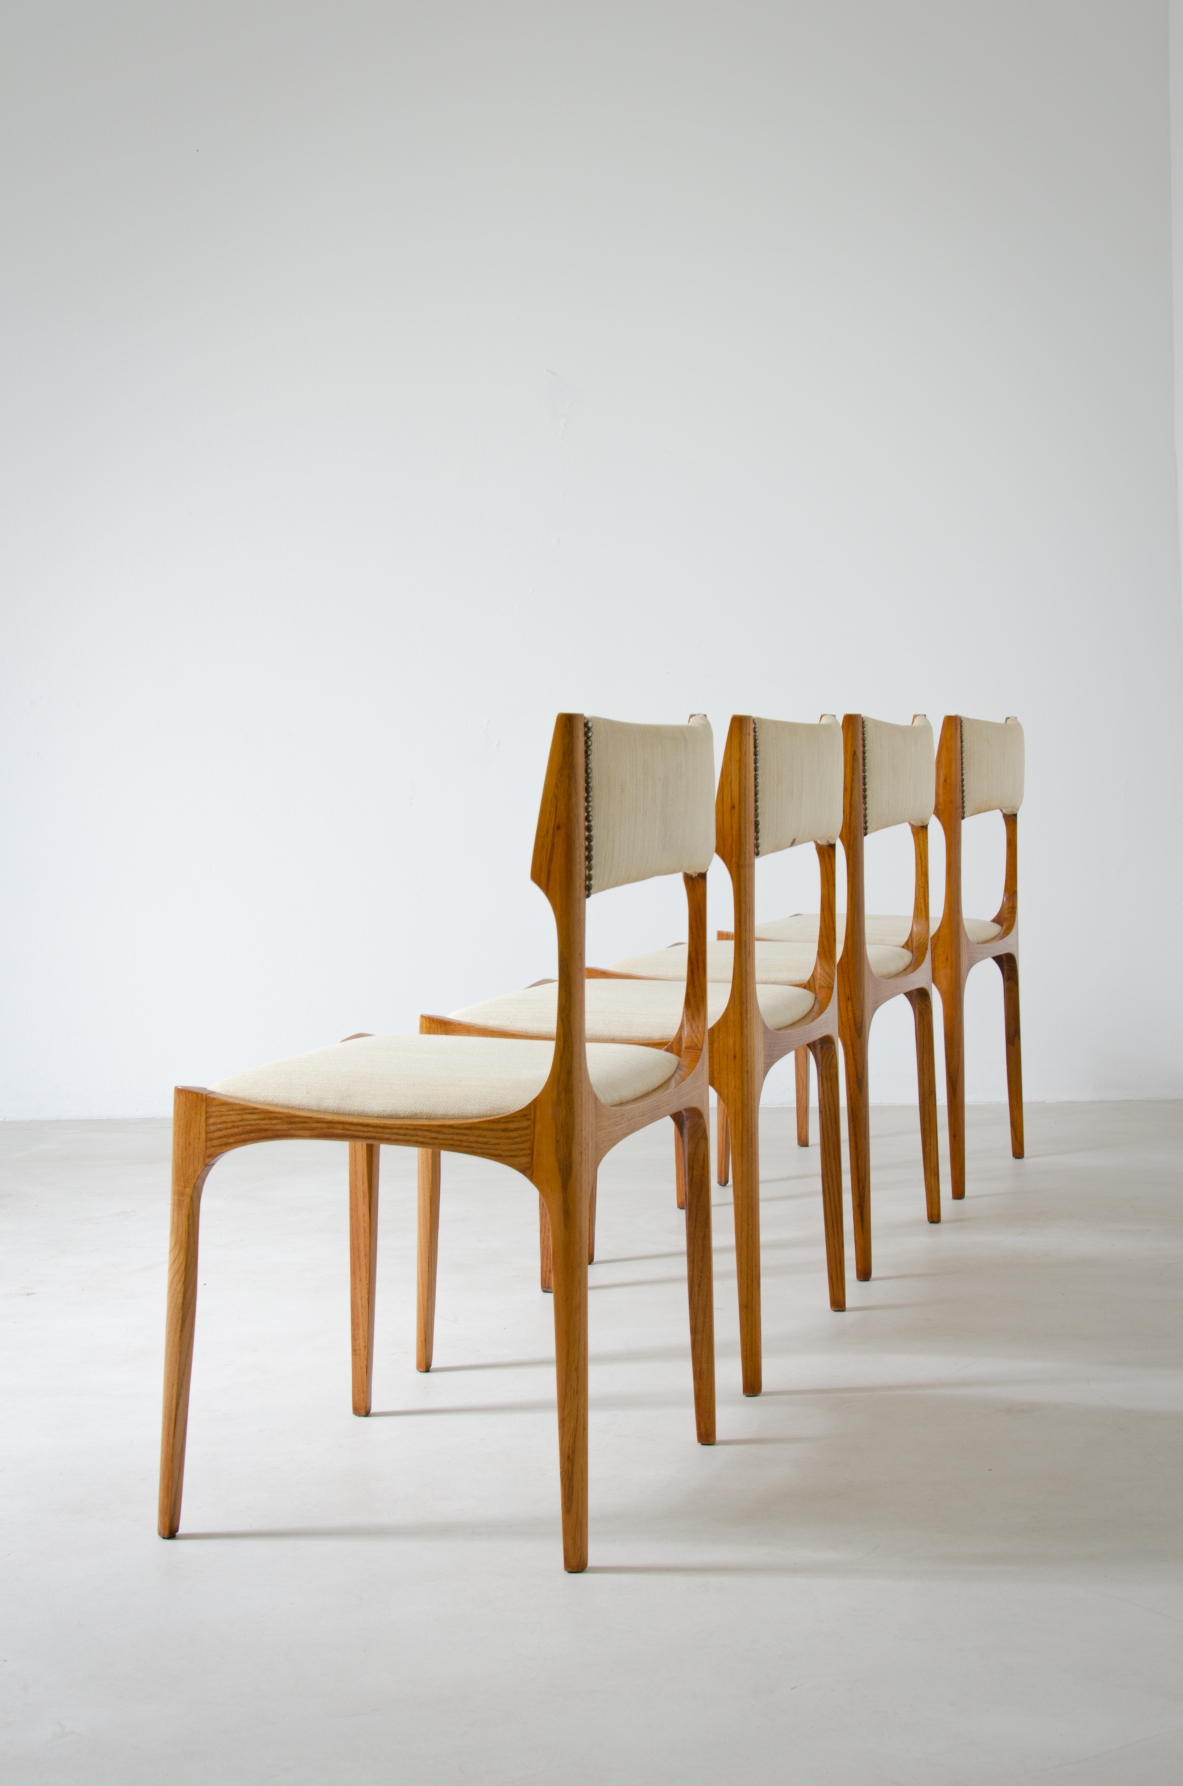 Giuseppe Gibelli  Set of 4 chairs in ash and upholstered fabric.  Sormani Manufacture, 1963.